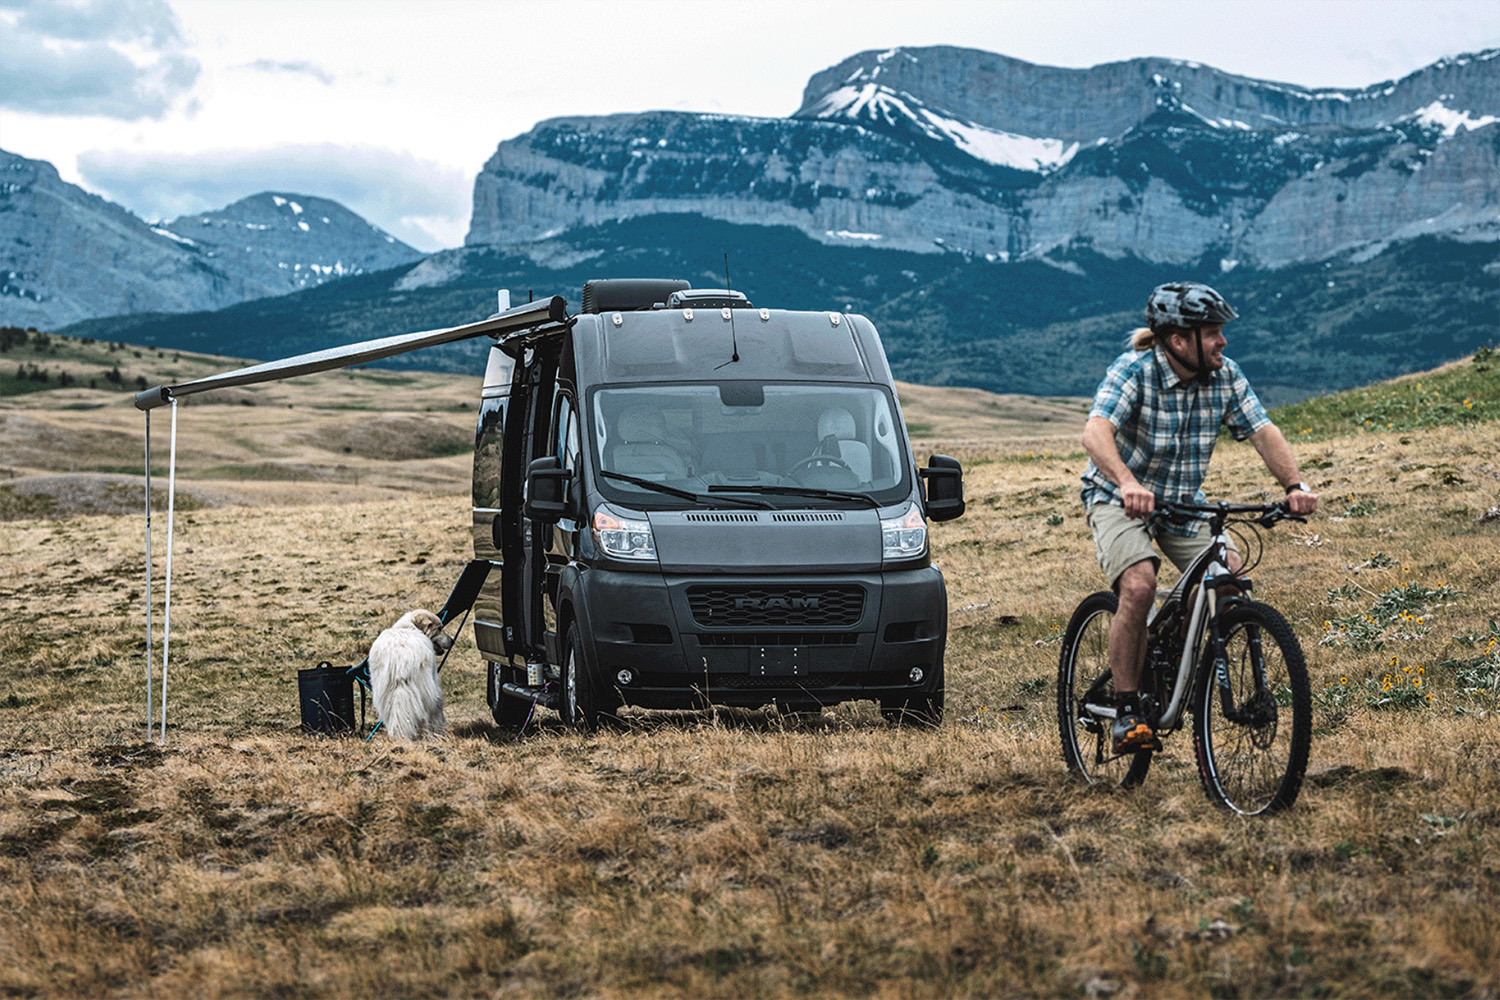 A man cycling away from an Airstream Van in a grassy valley next to the mountains